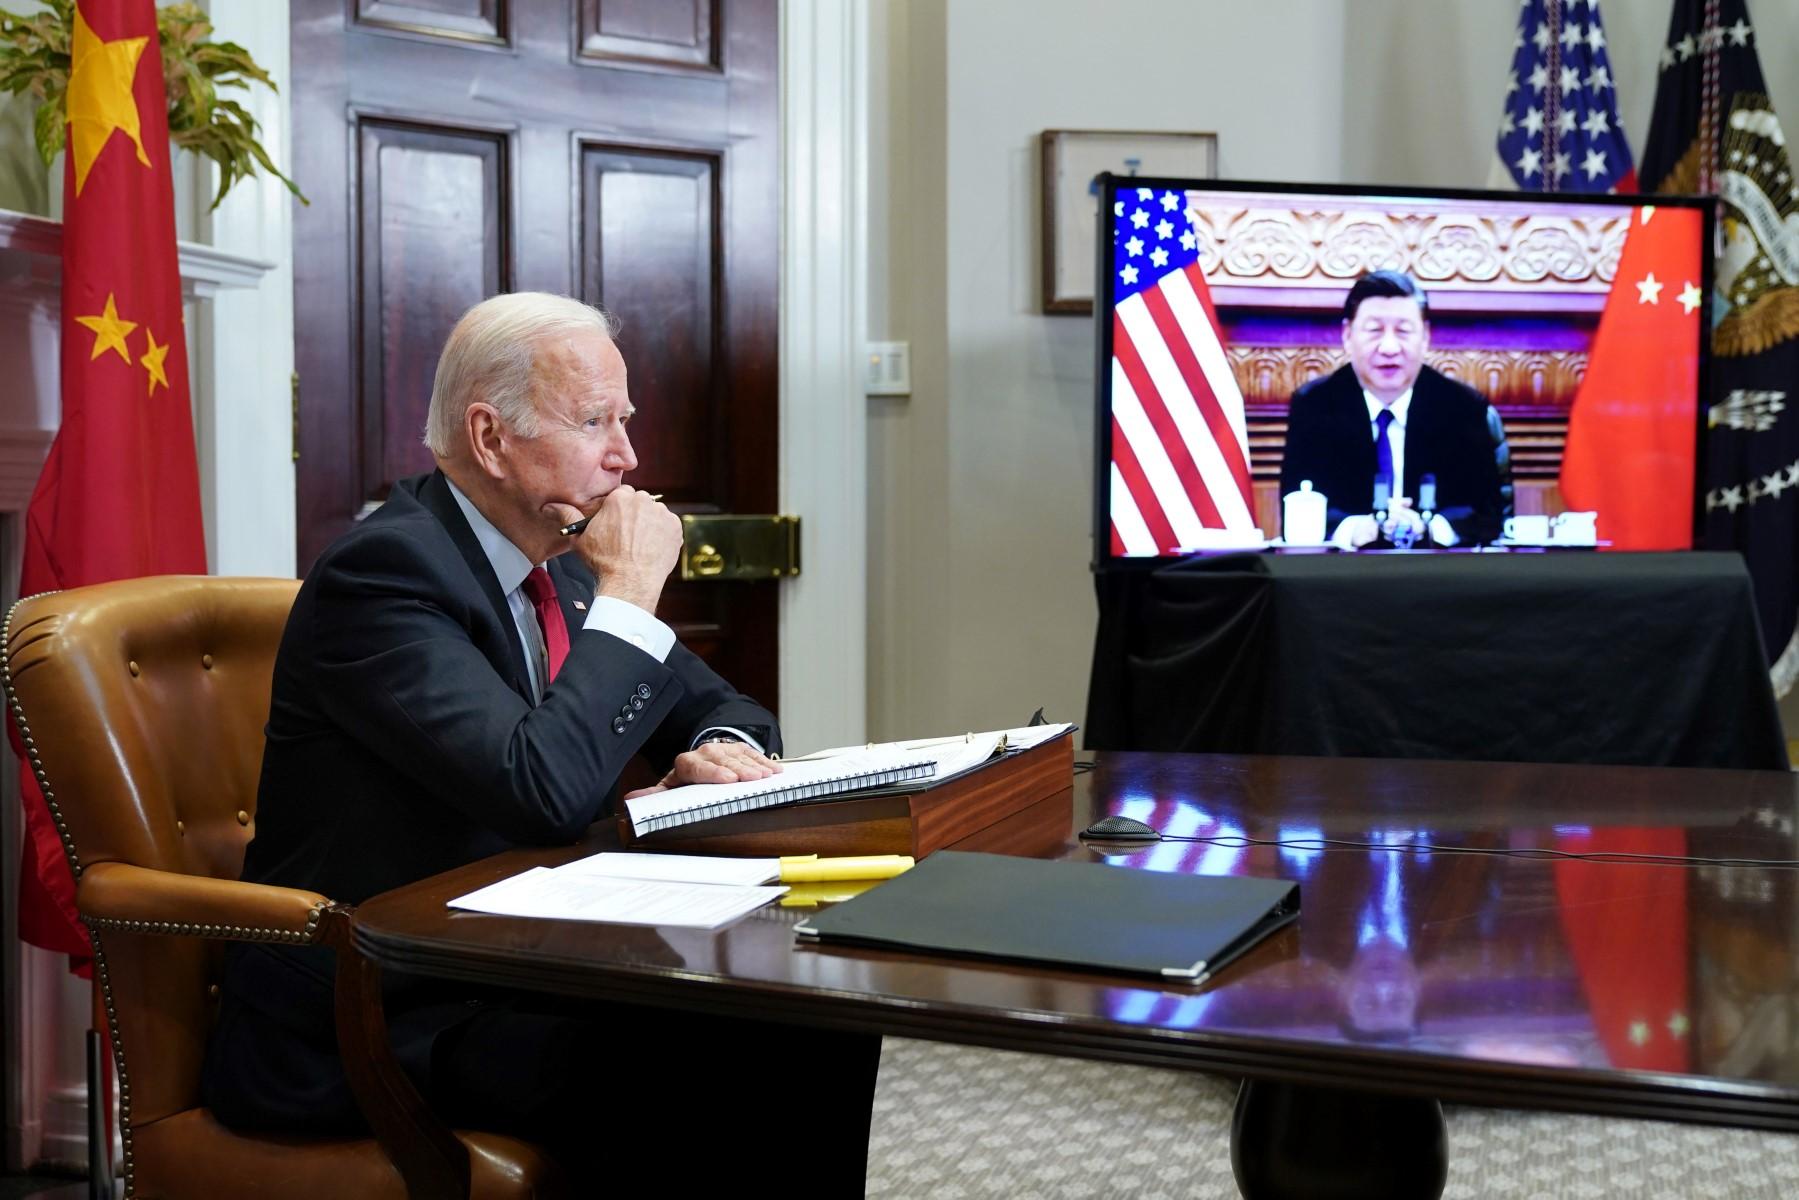 In this file photo taken on Nov 15, 2021, US President Joe Biden meets with China's President Xi Jinping during a virtual summit from the Roosevelt Room of the White House in Washington DC. Photo: AFP